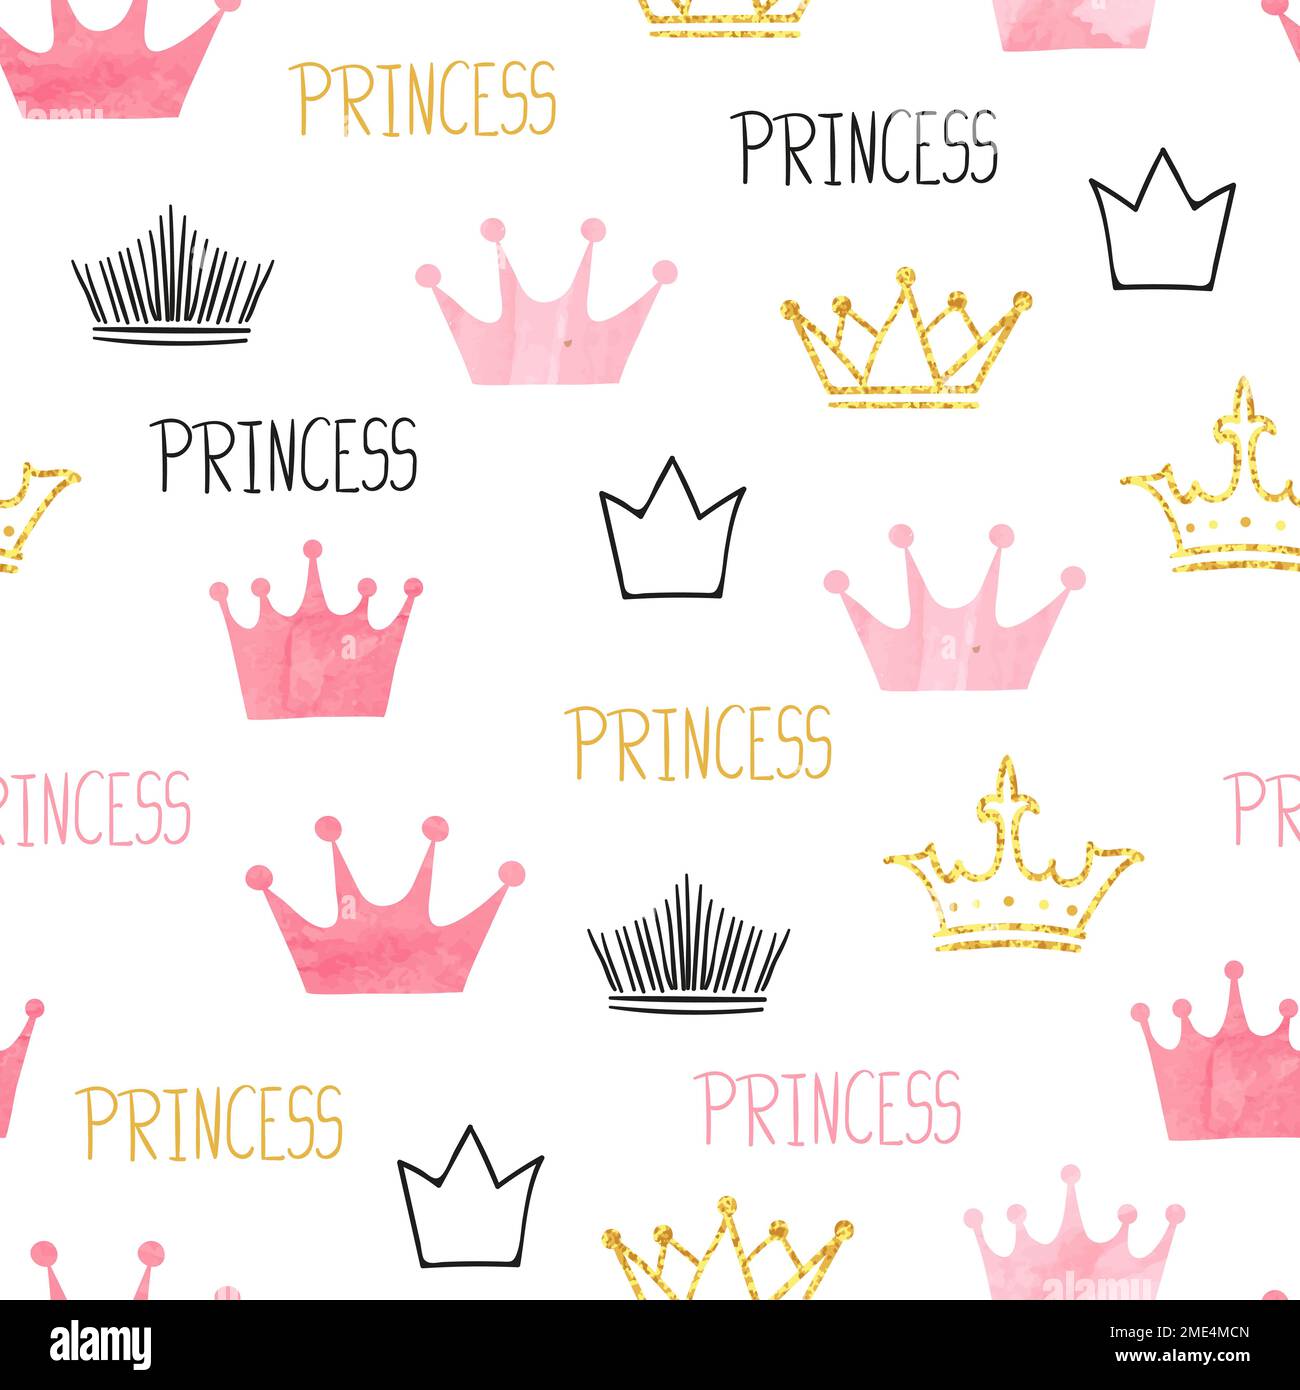 Little princess seamless pattern in pink and golden colors. Vector background with watercolor and glittering crowns Stock Vector